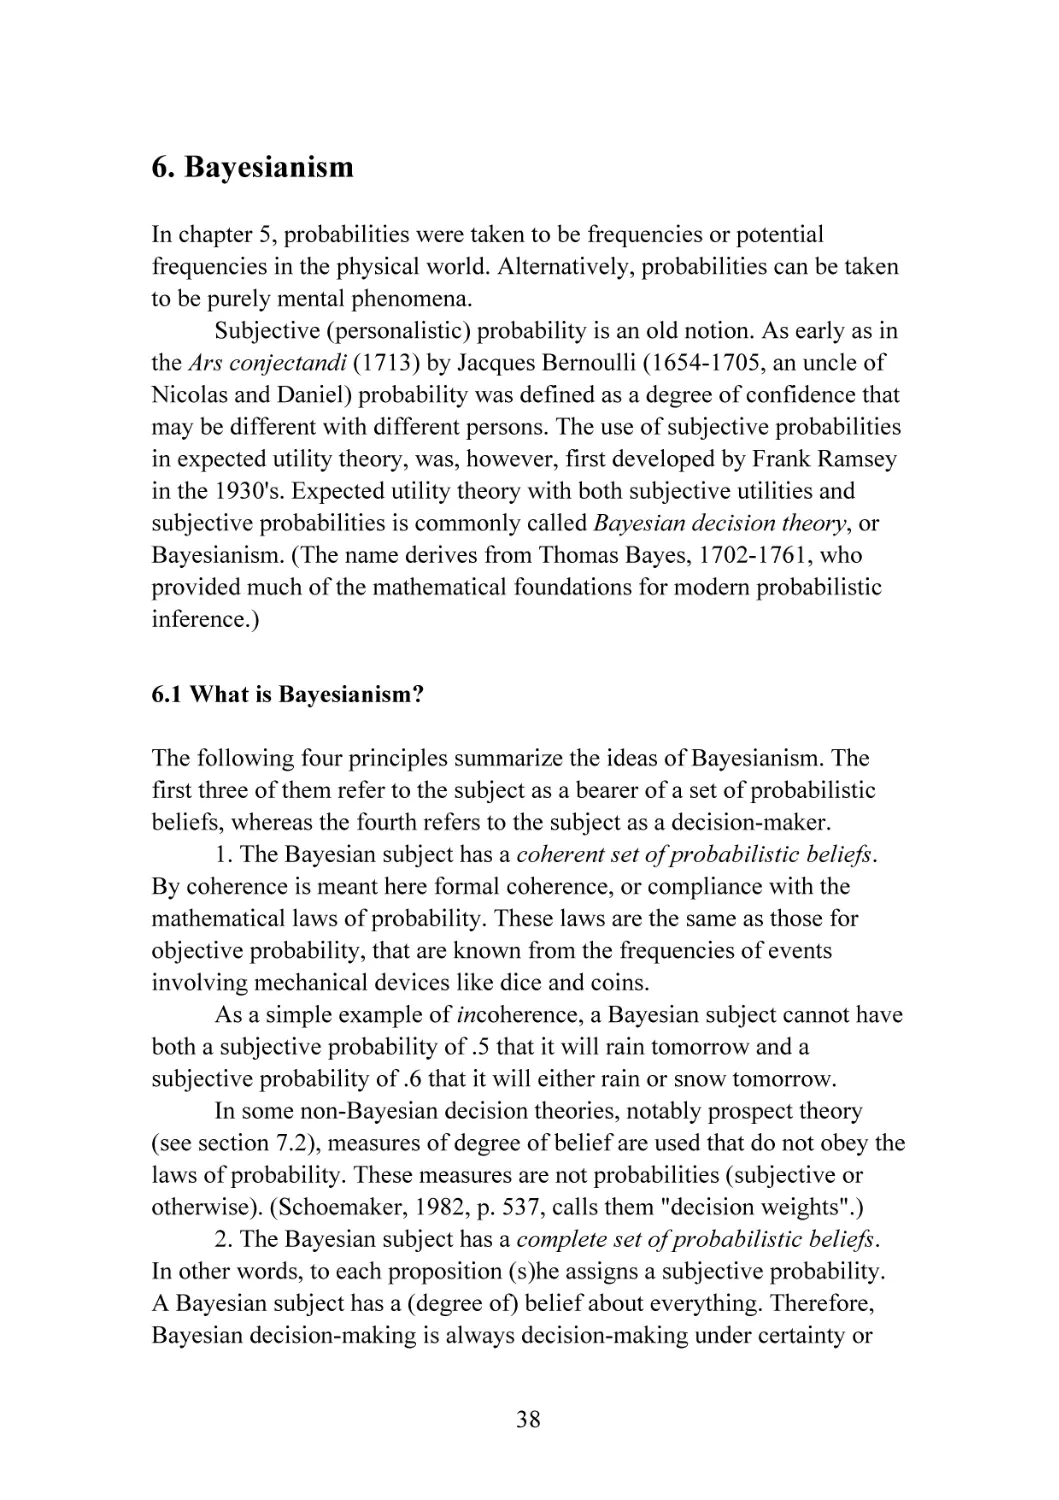 6. Bayesianism
6.1 What is Bayesianism?